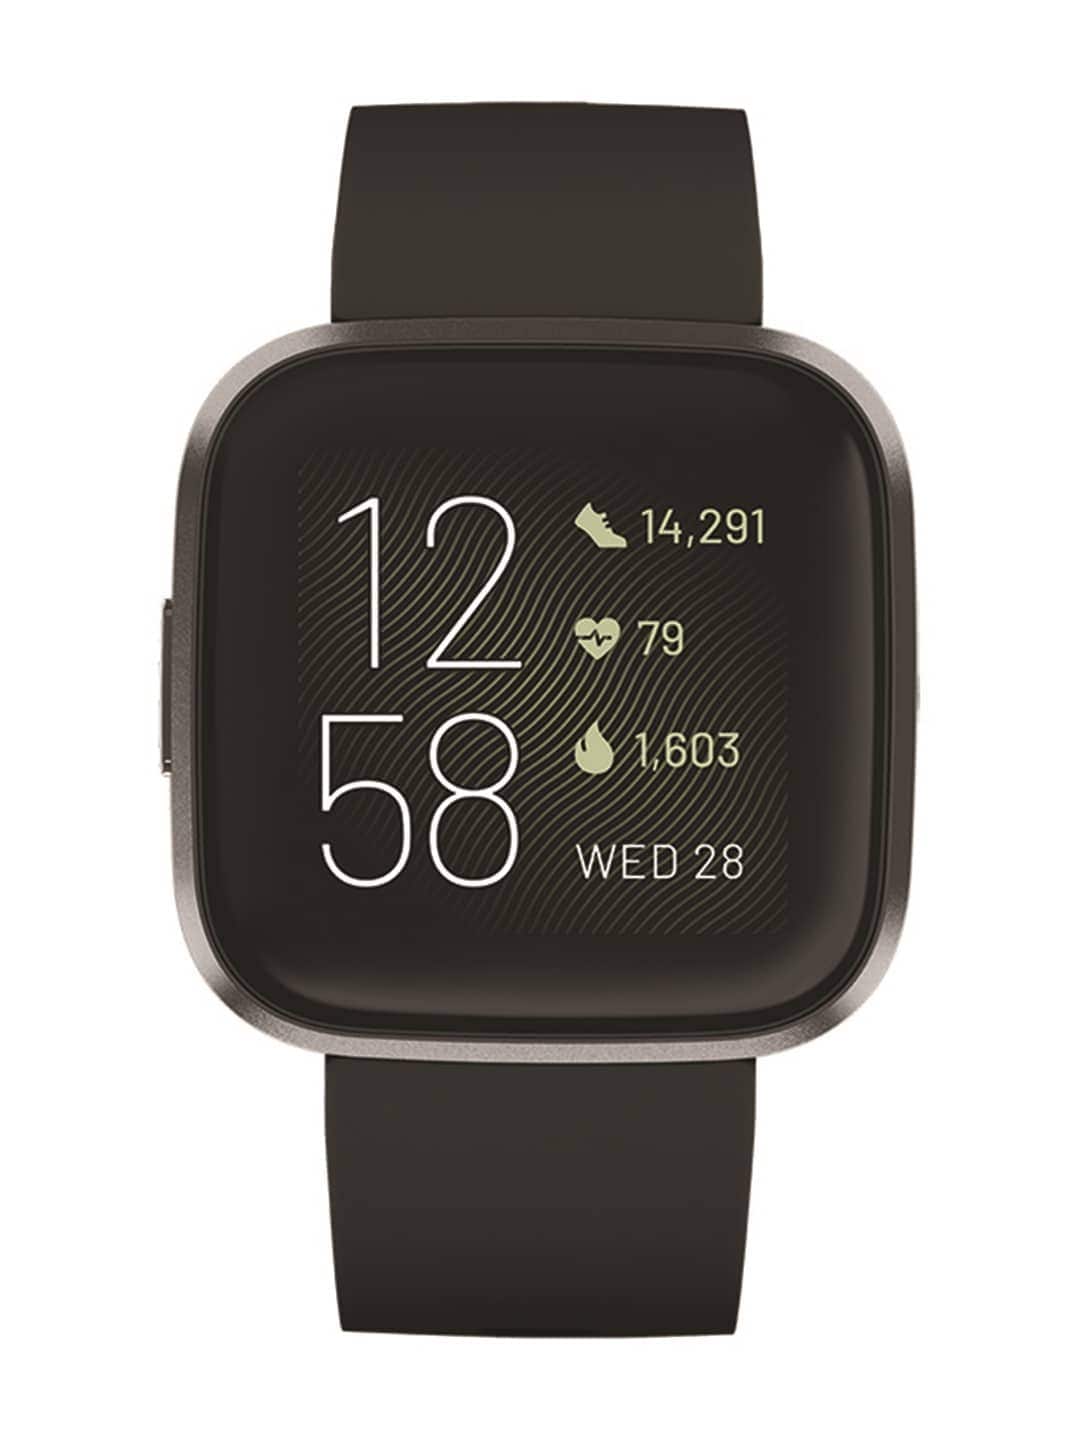 Fitbit Versa2 carbon black fitness Smartwatch with Heart Rate Alexa & Sleep Tracking Price in India